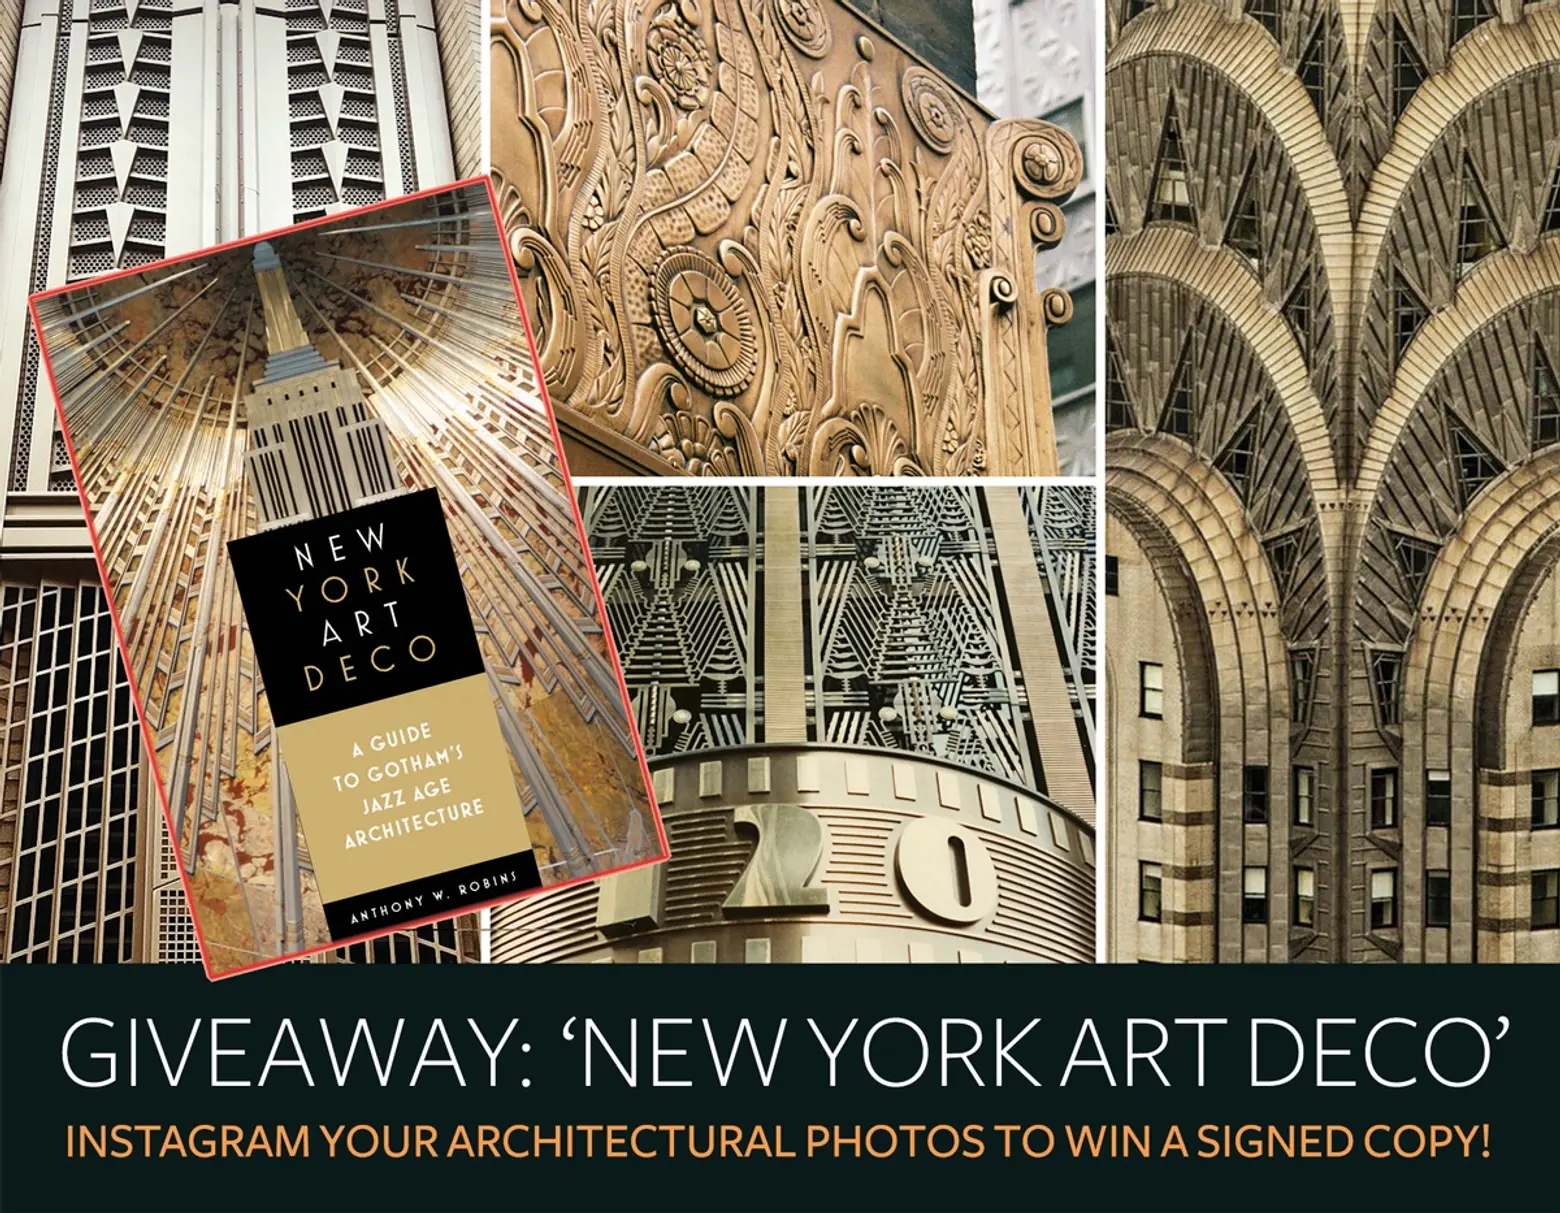 LAST CHANCE: Instagram your architectural photos to win a signed copy of ‘New York Art Deco’